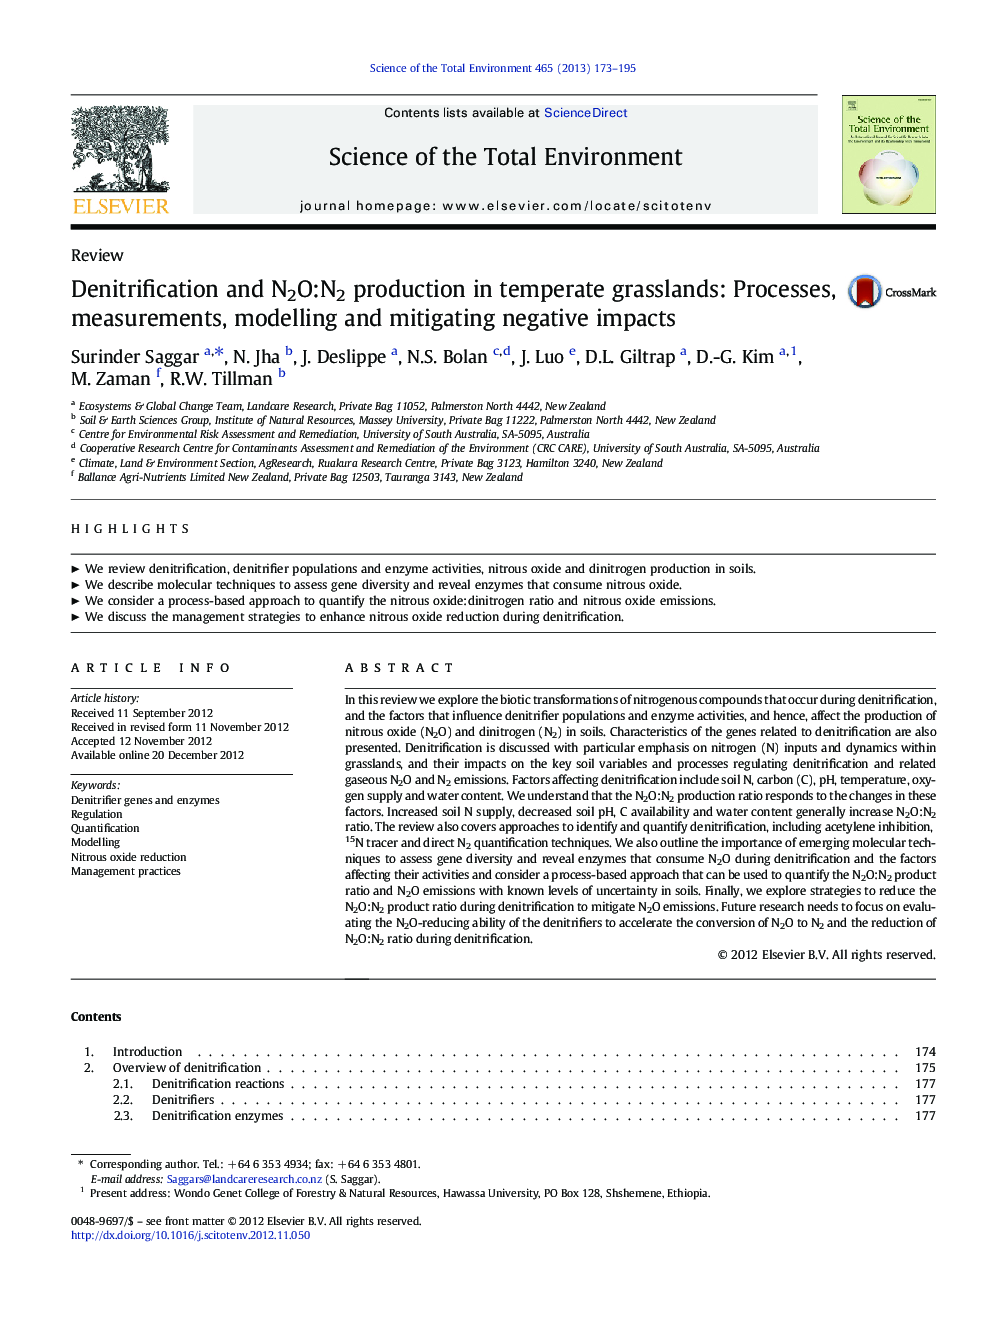 Denitrification and N2O:N2 production in temperate grasslands: Processes, measurements, modelling and mitigating negative impacts